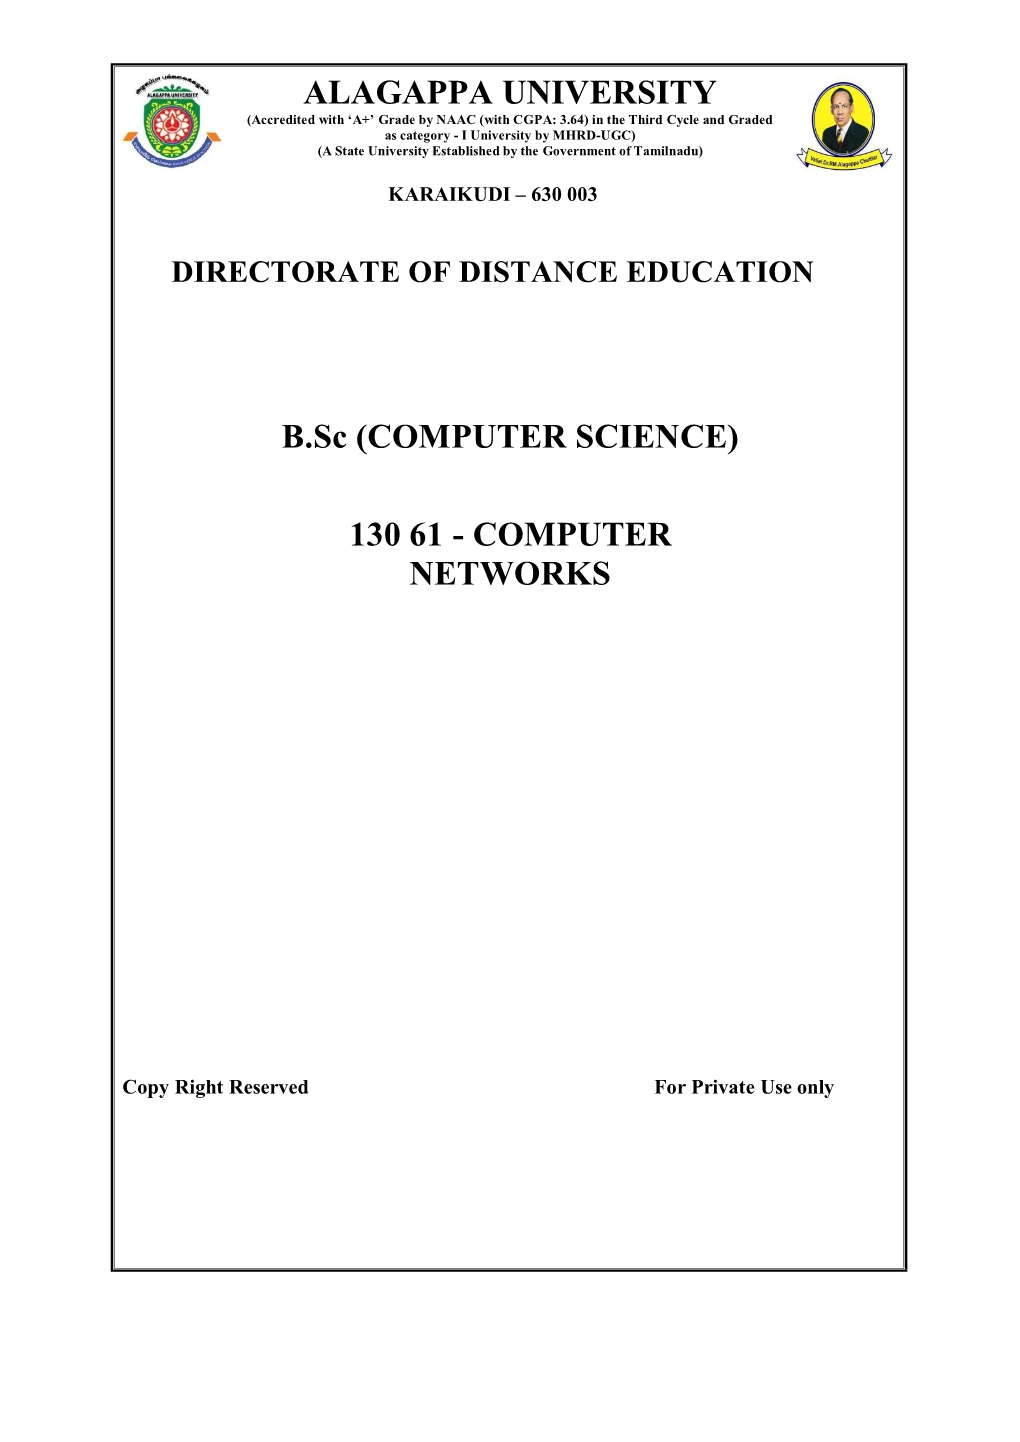 130 61 - Computer Networks